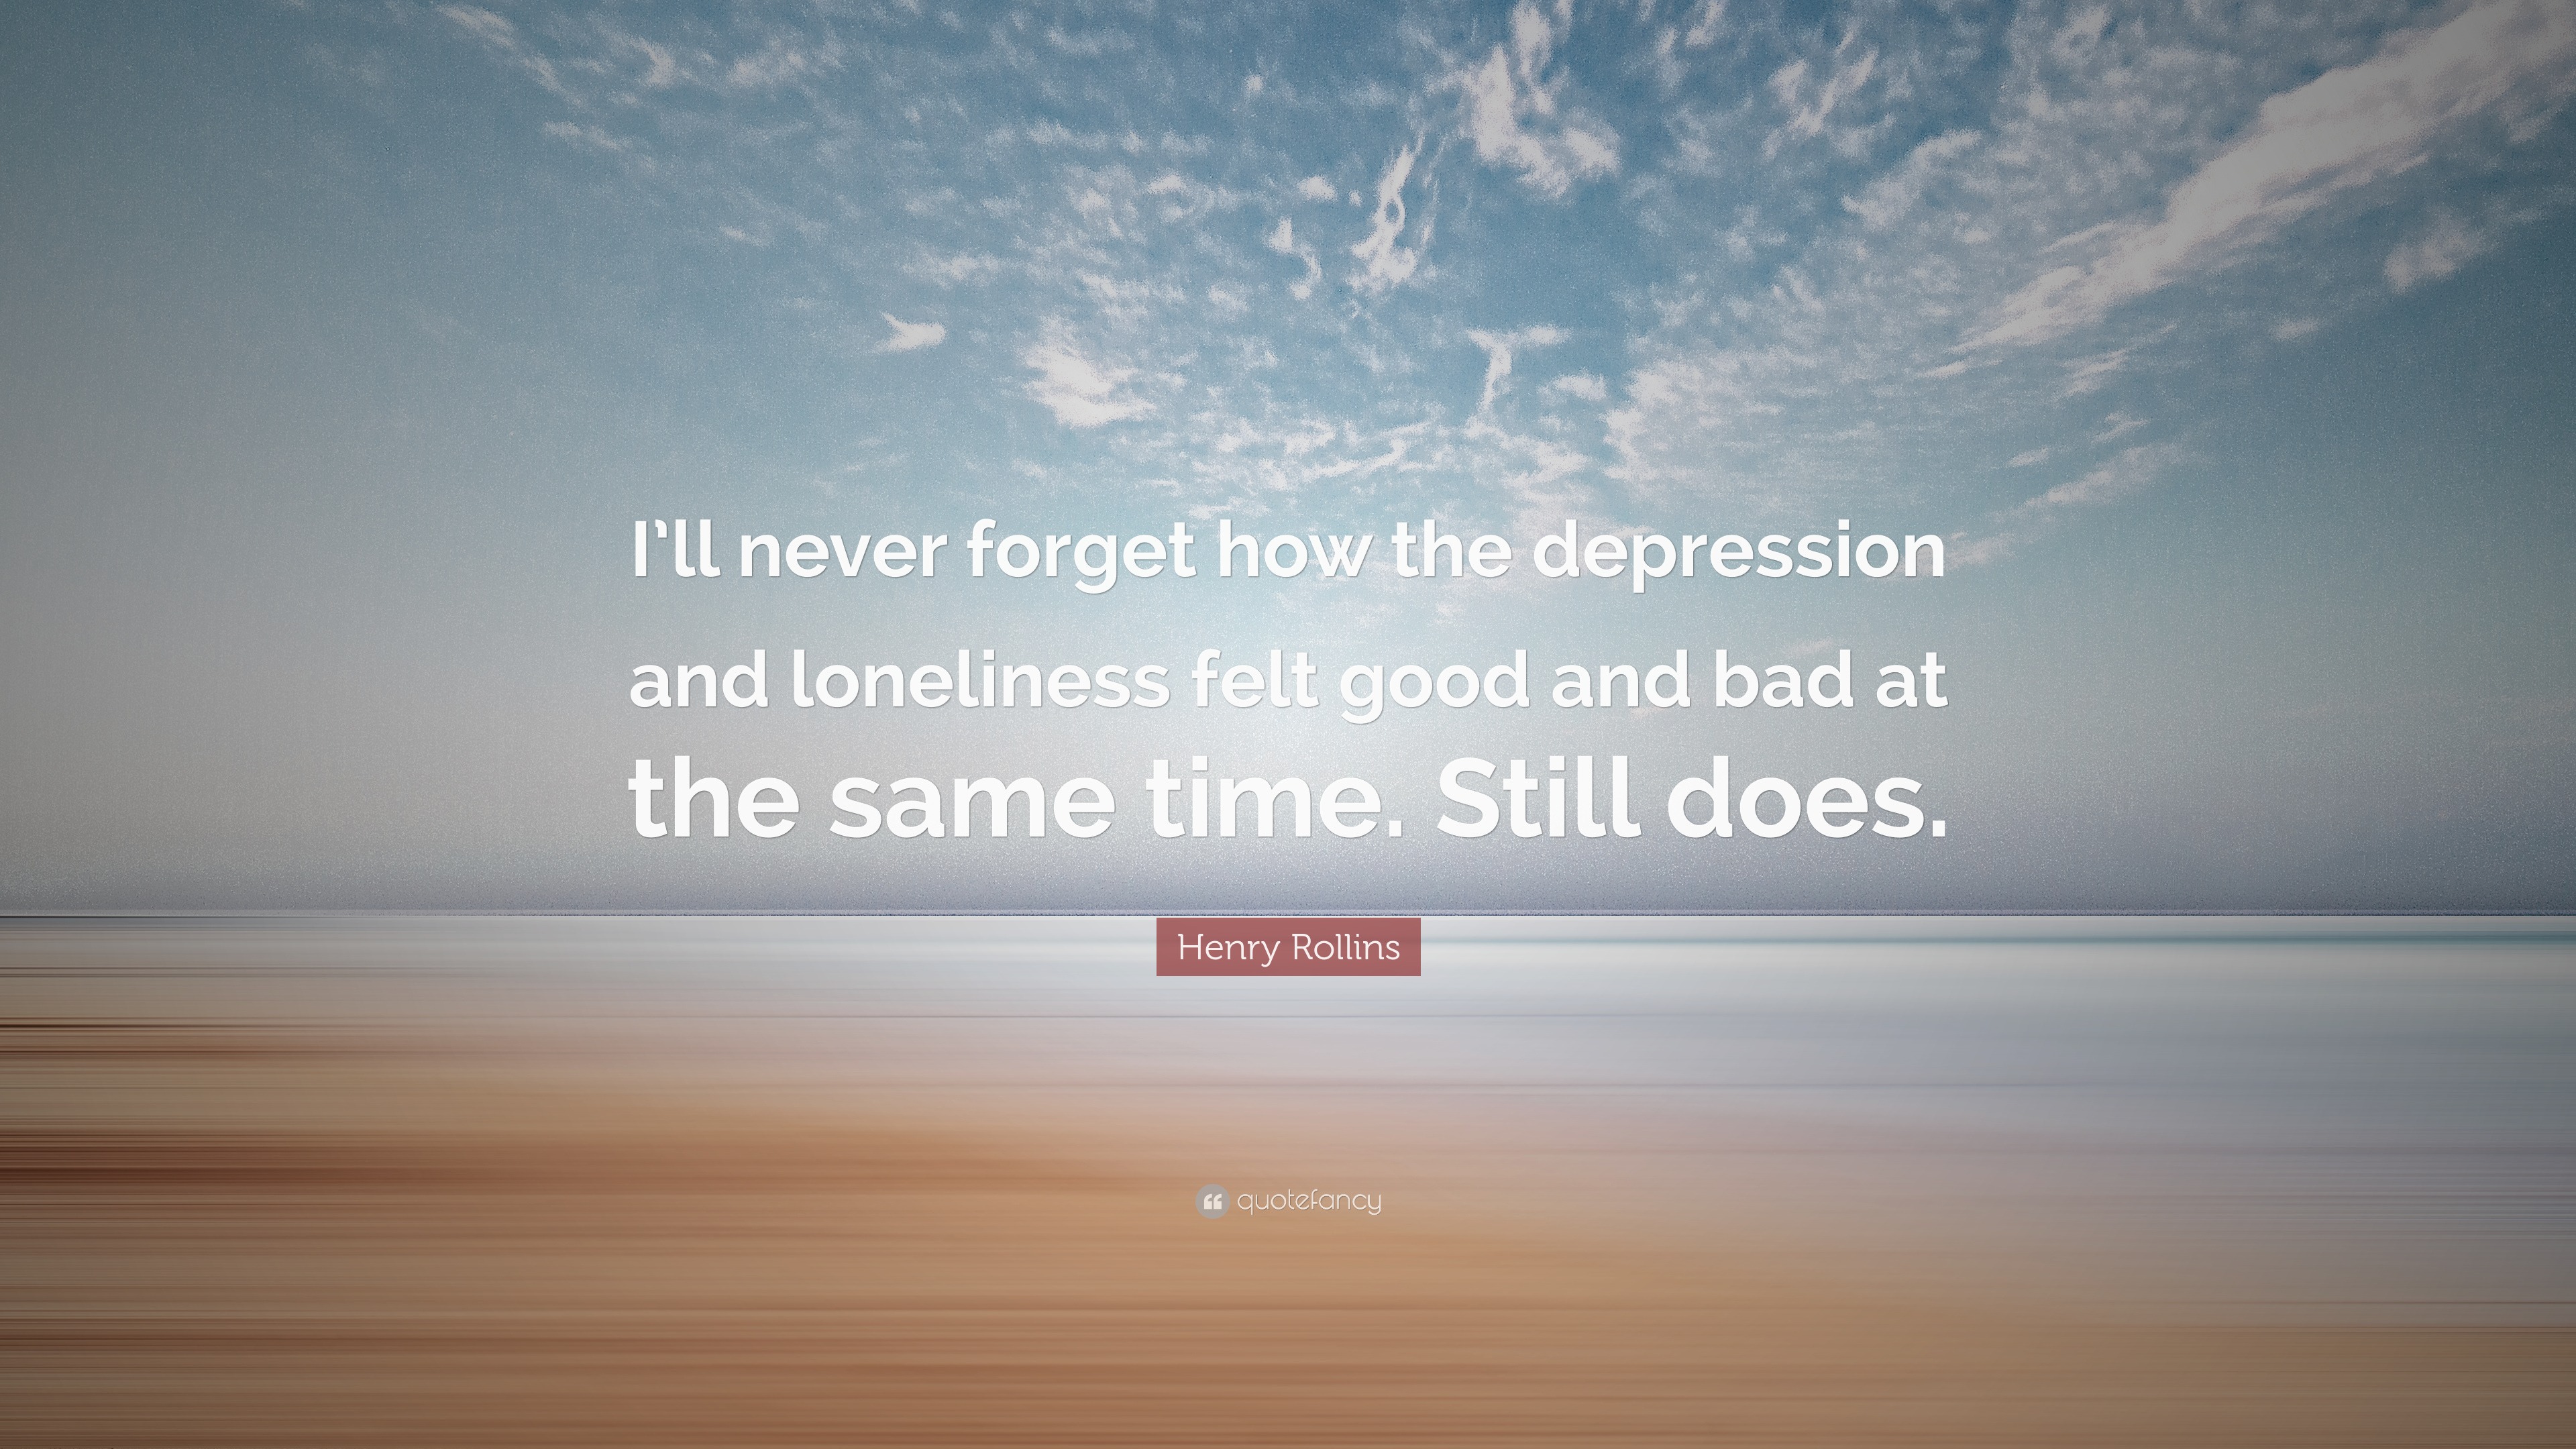 Henry Rollins Quote: “I’ll never forget how the depression and ...